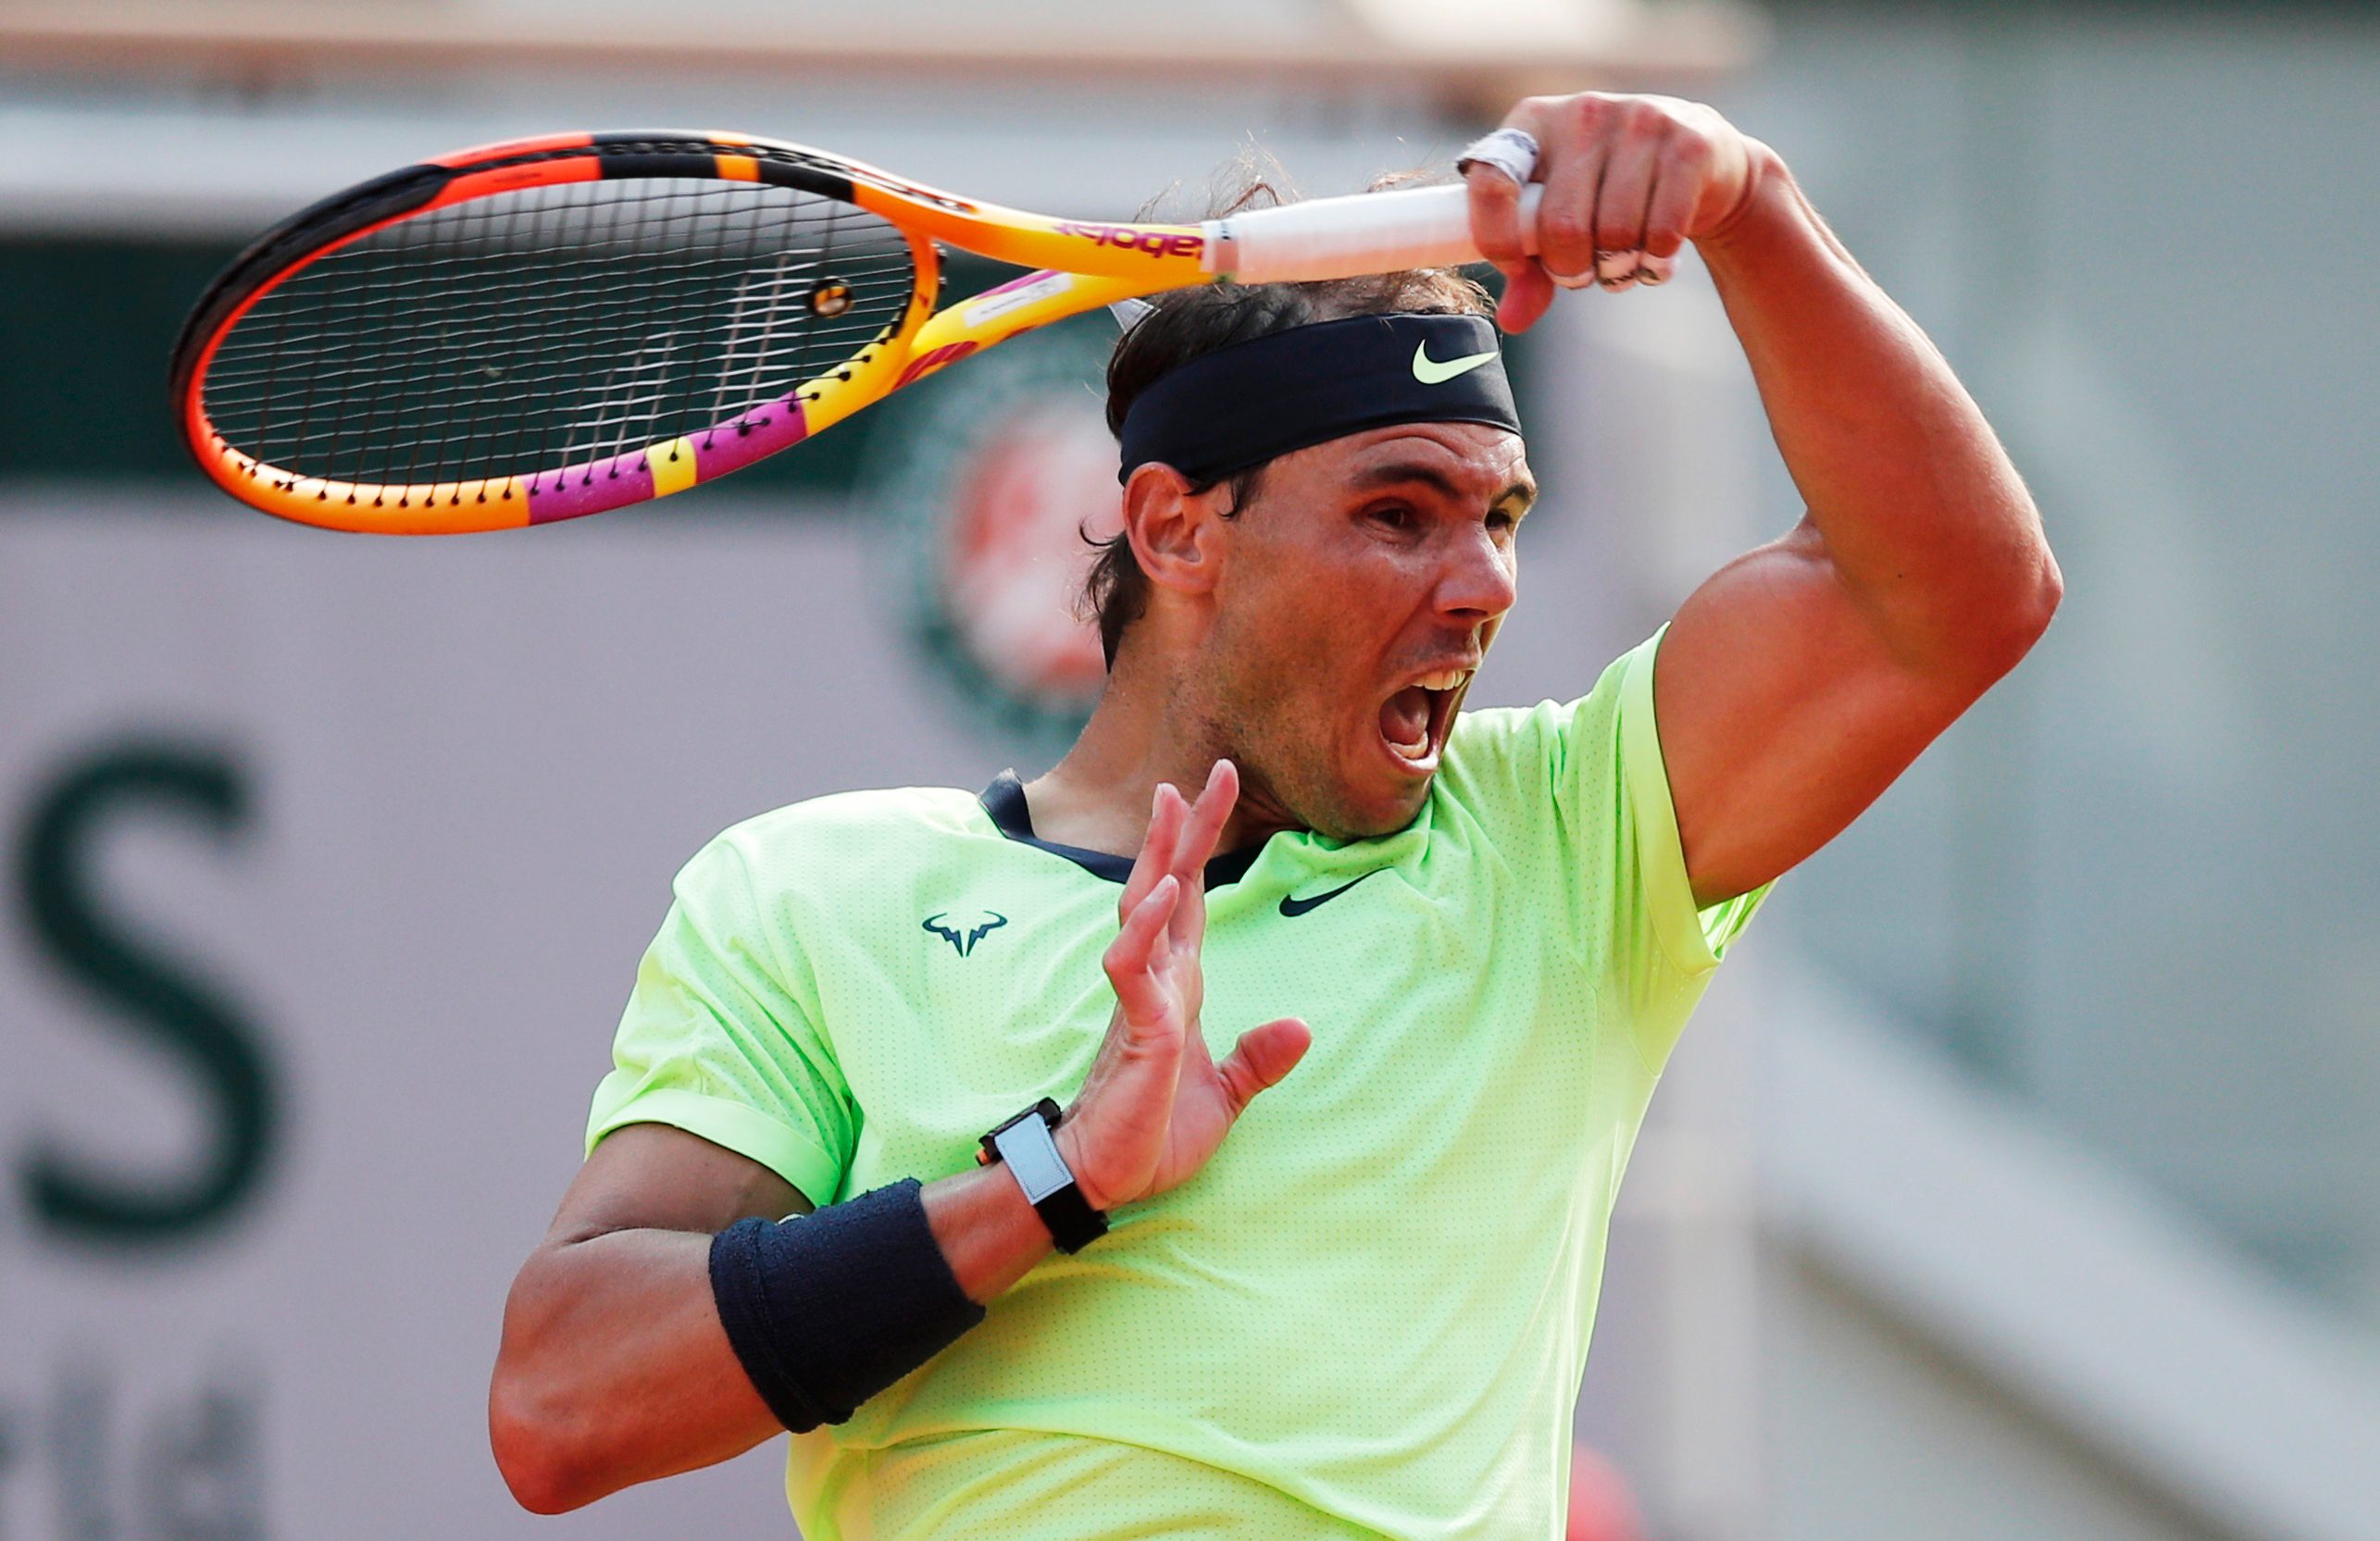 Injury-hit Nadal still unclear when he’ll play again